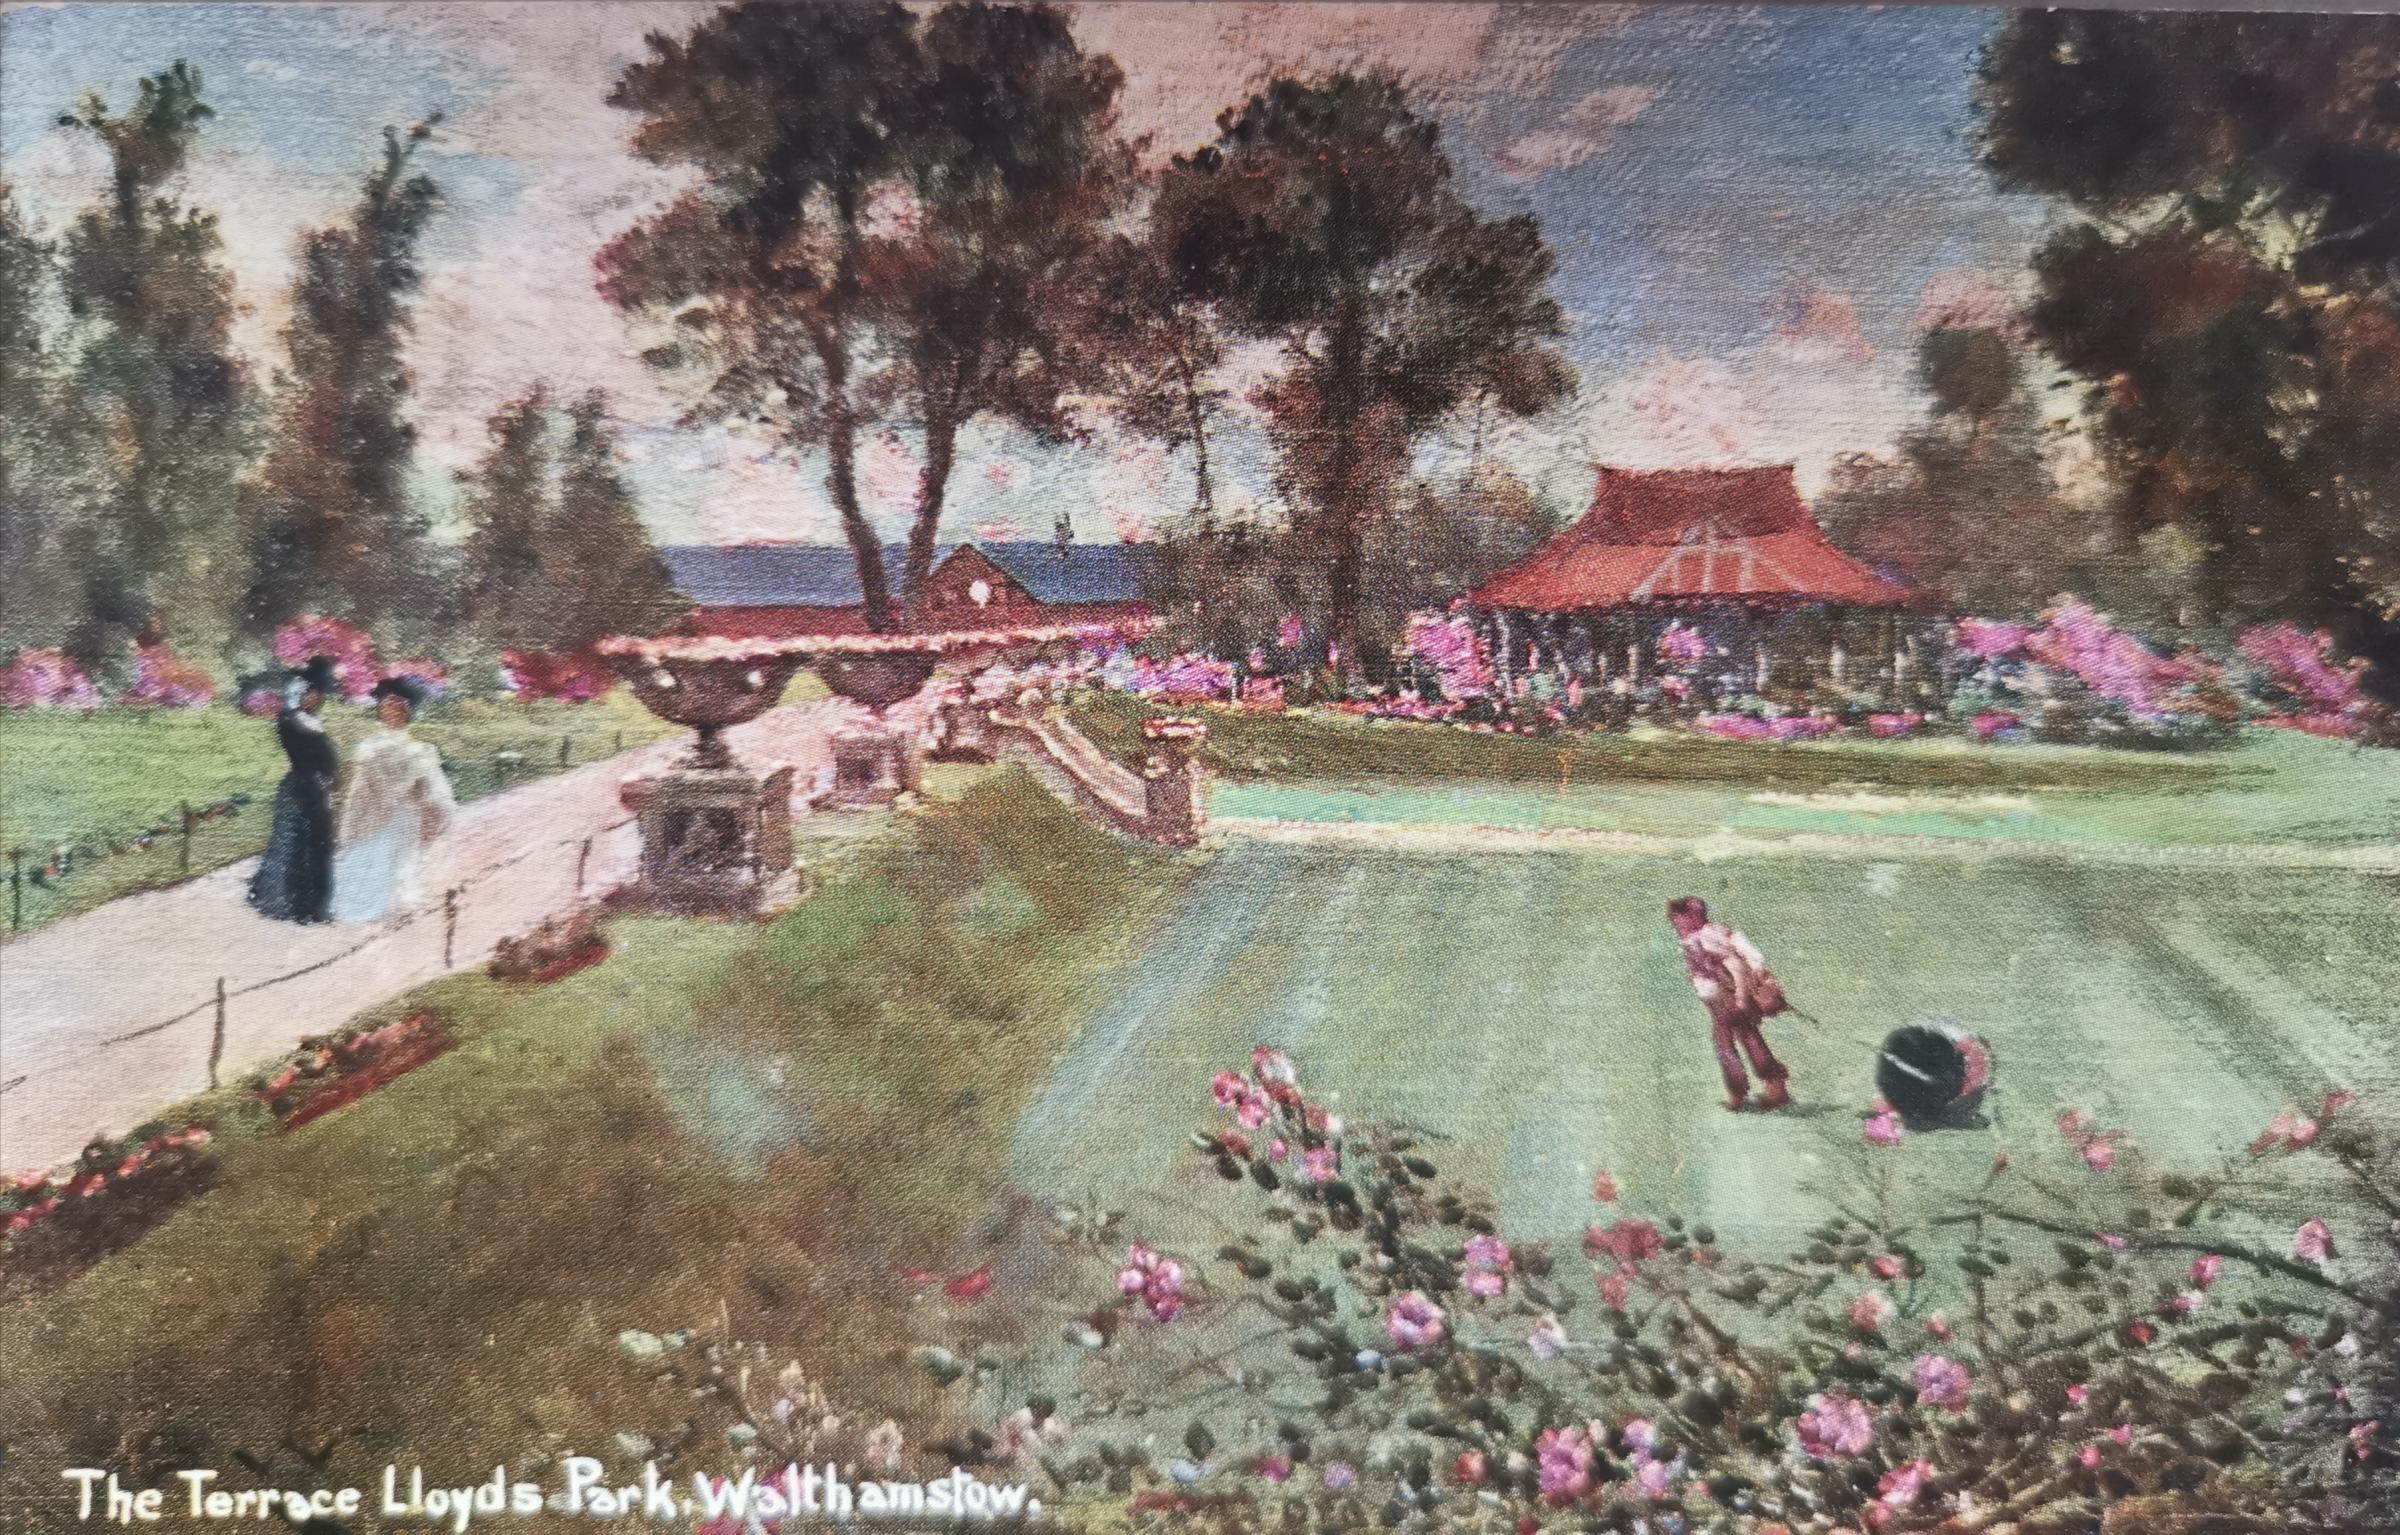 A postcard with an early view of Lloyd Park